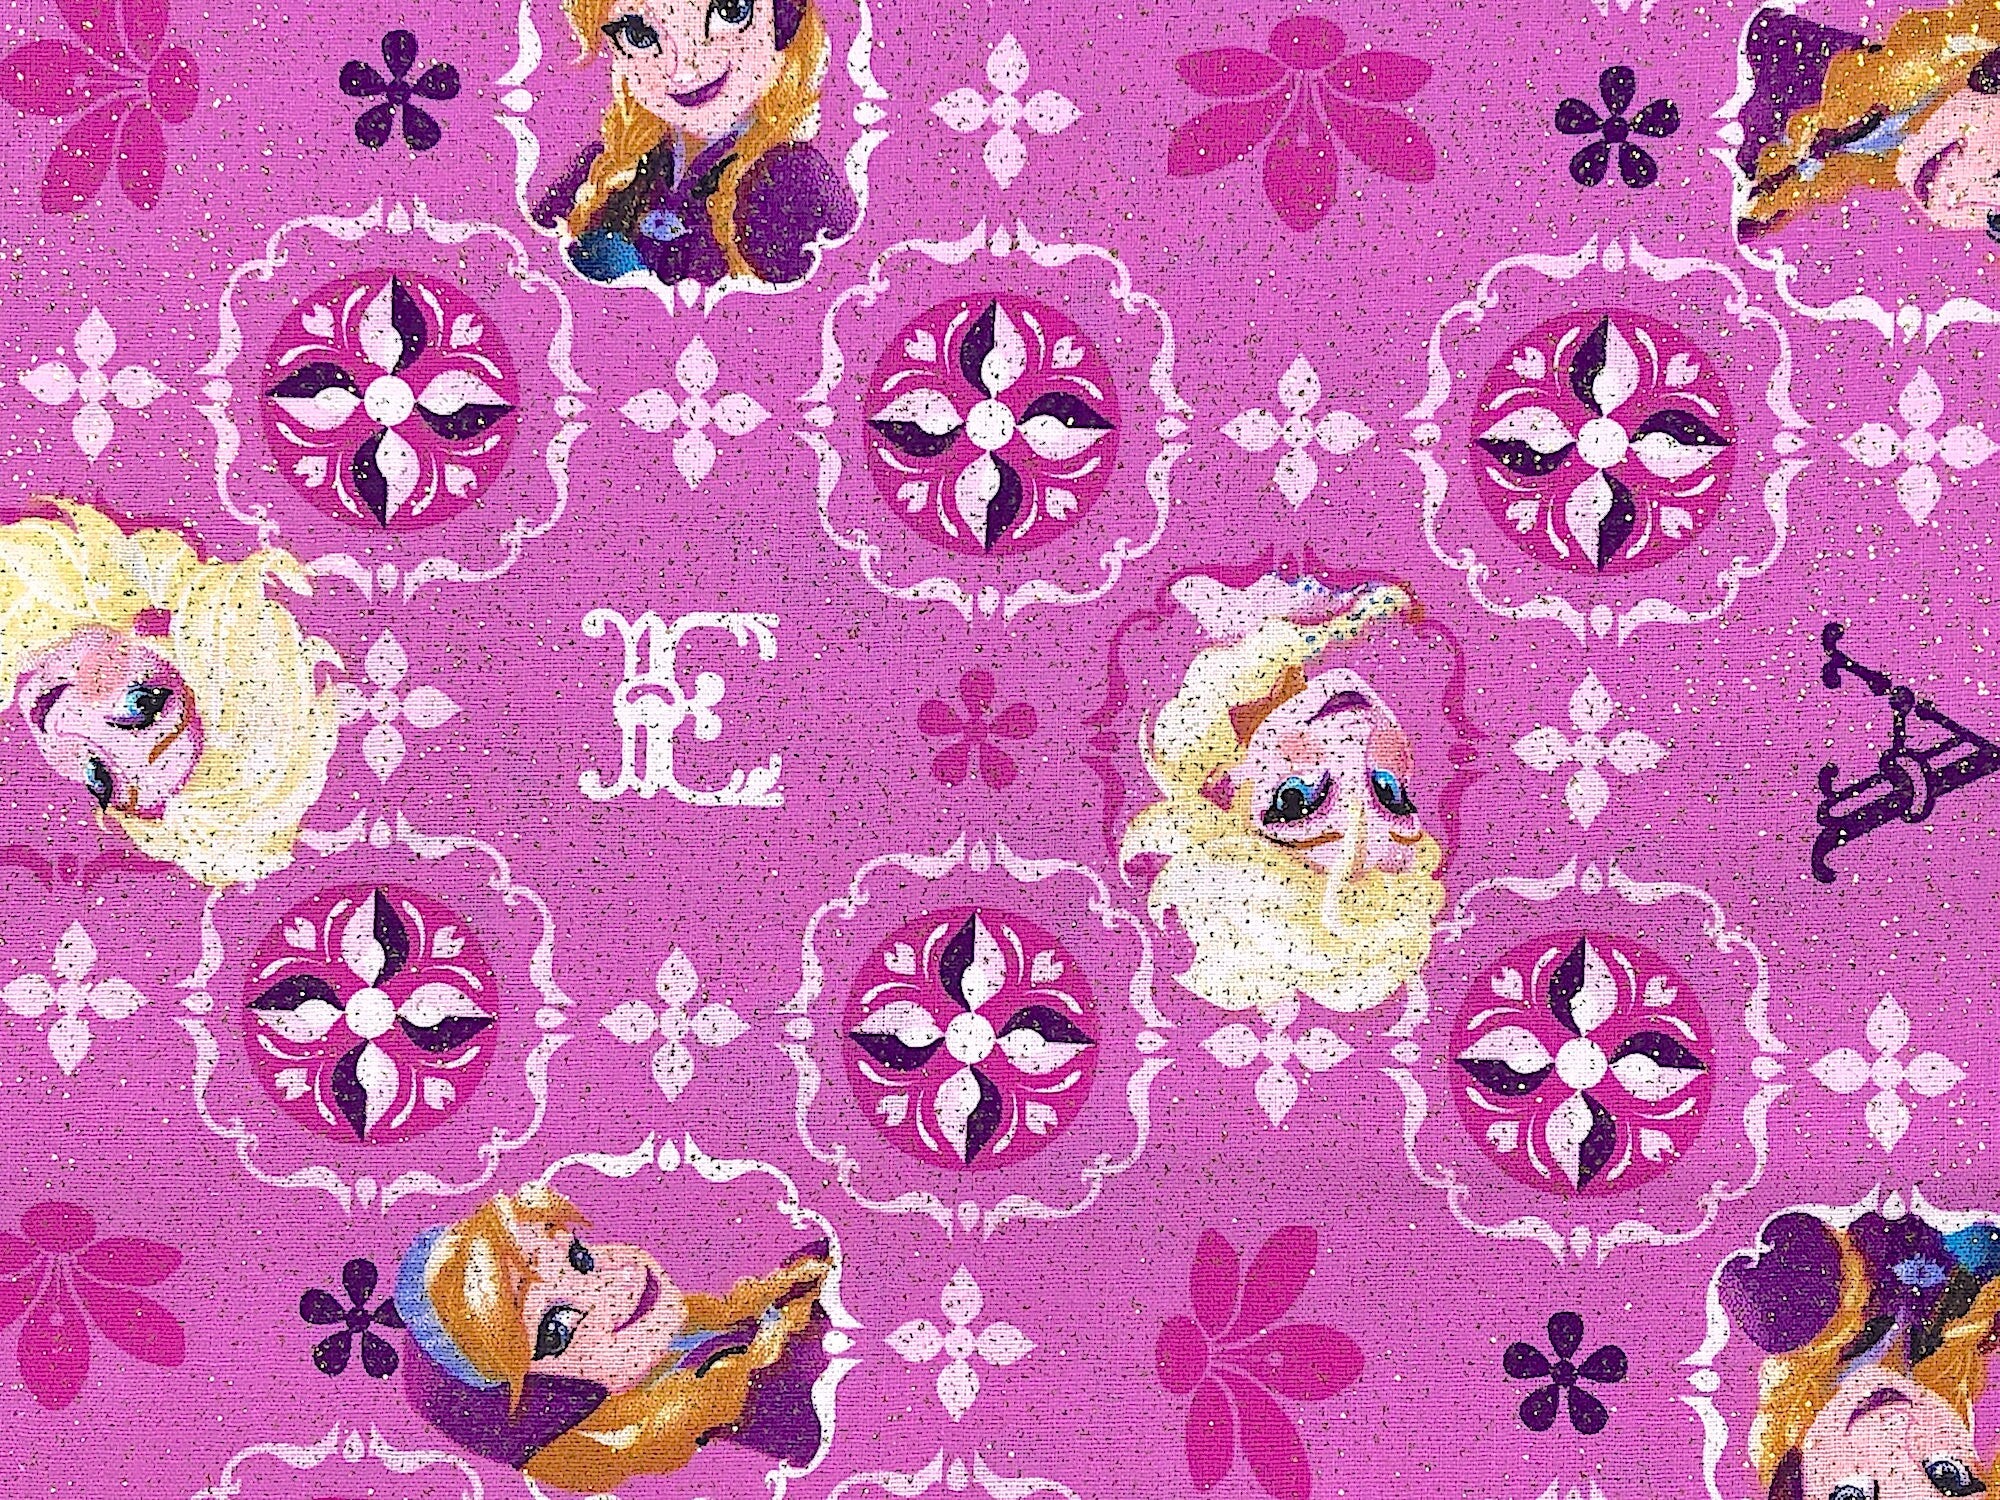 This Frozen fabric has Elsa and Ana on a pink background which is covered with glitter.